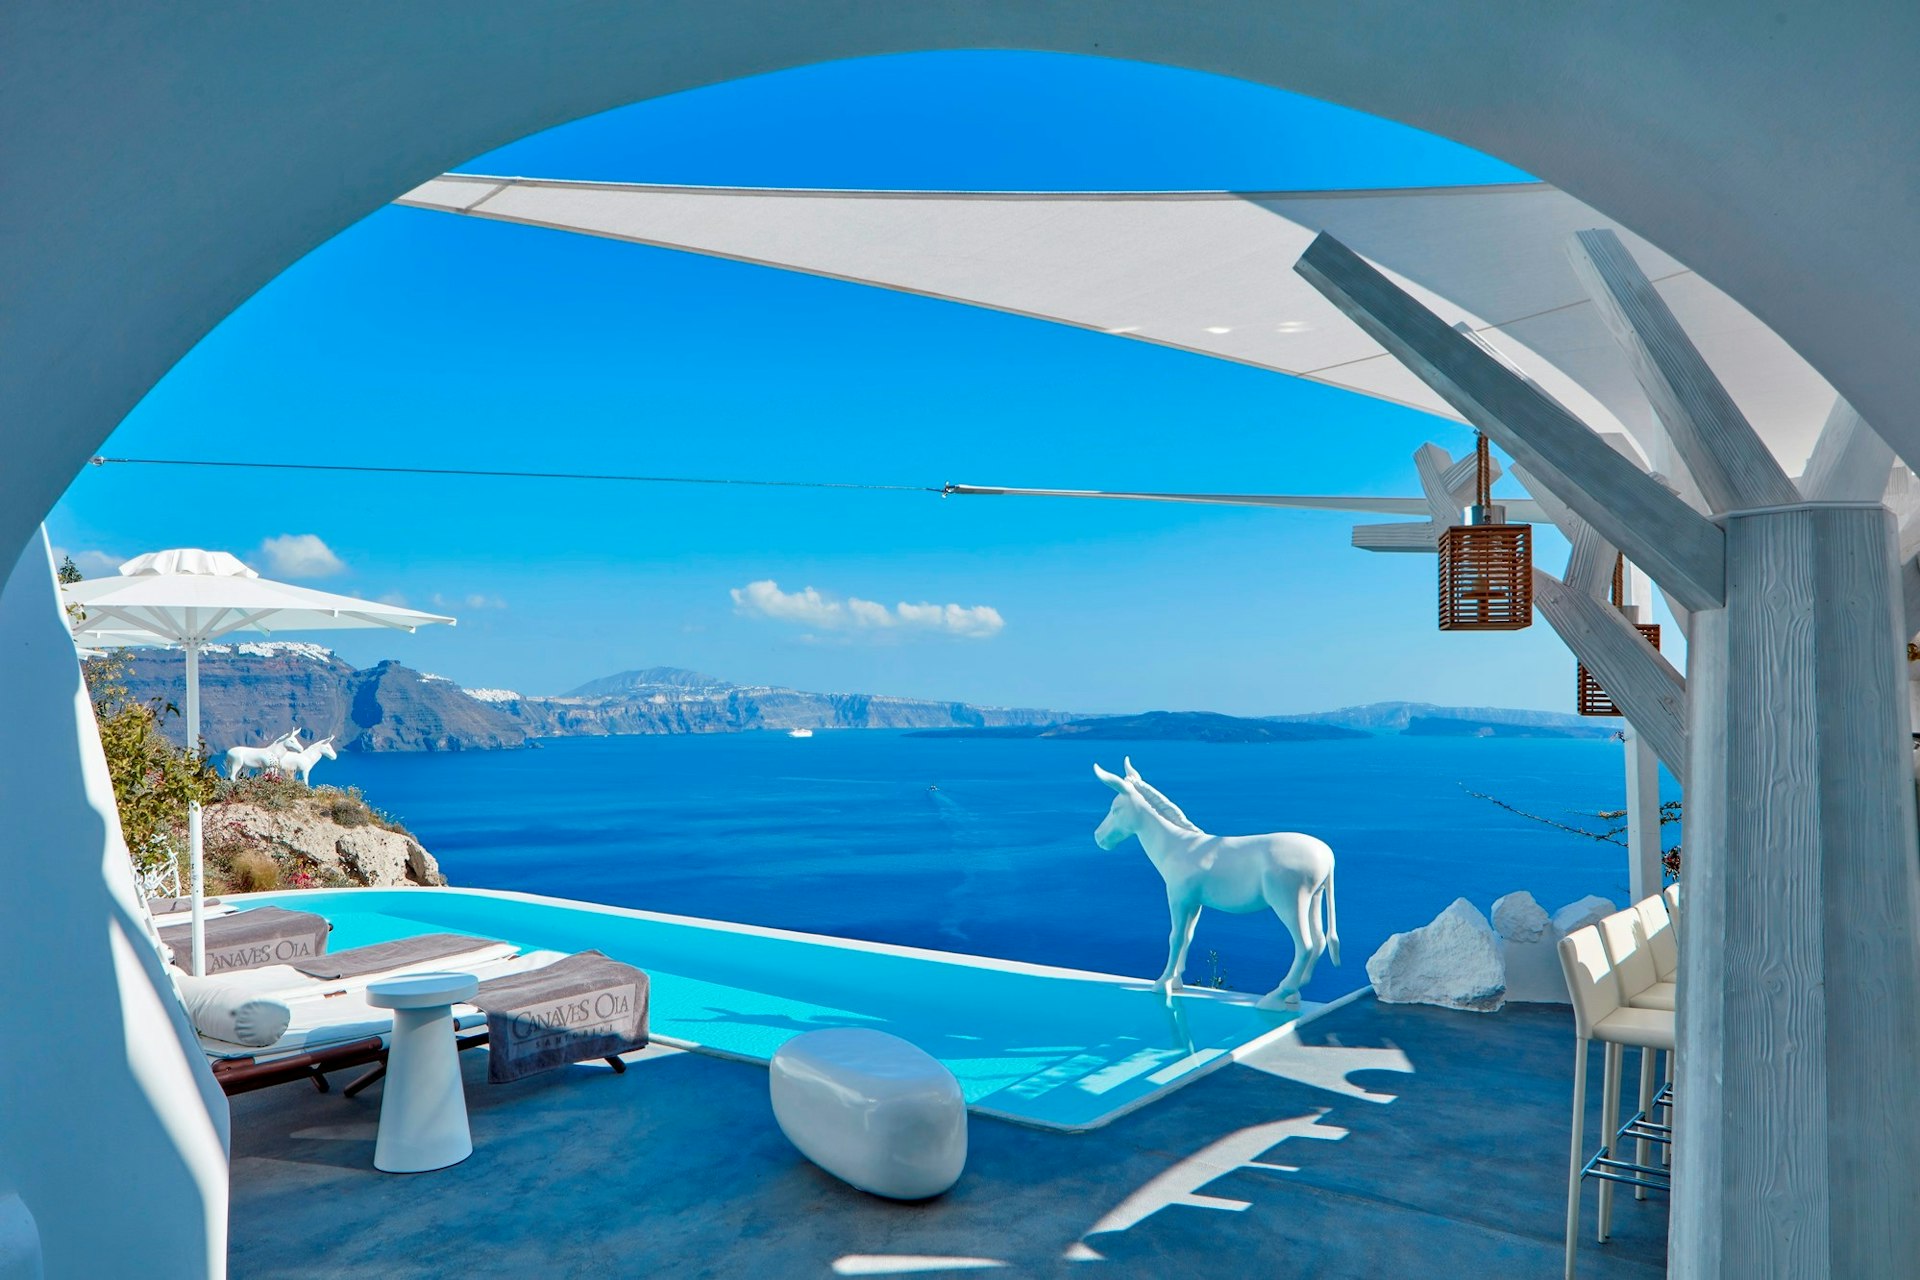 The infinity pool at the Canaves Oia Boutique Hotel, Santorini, Greece